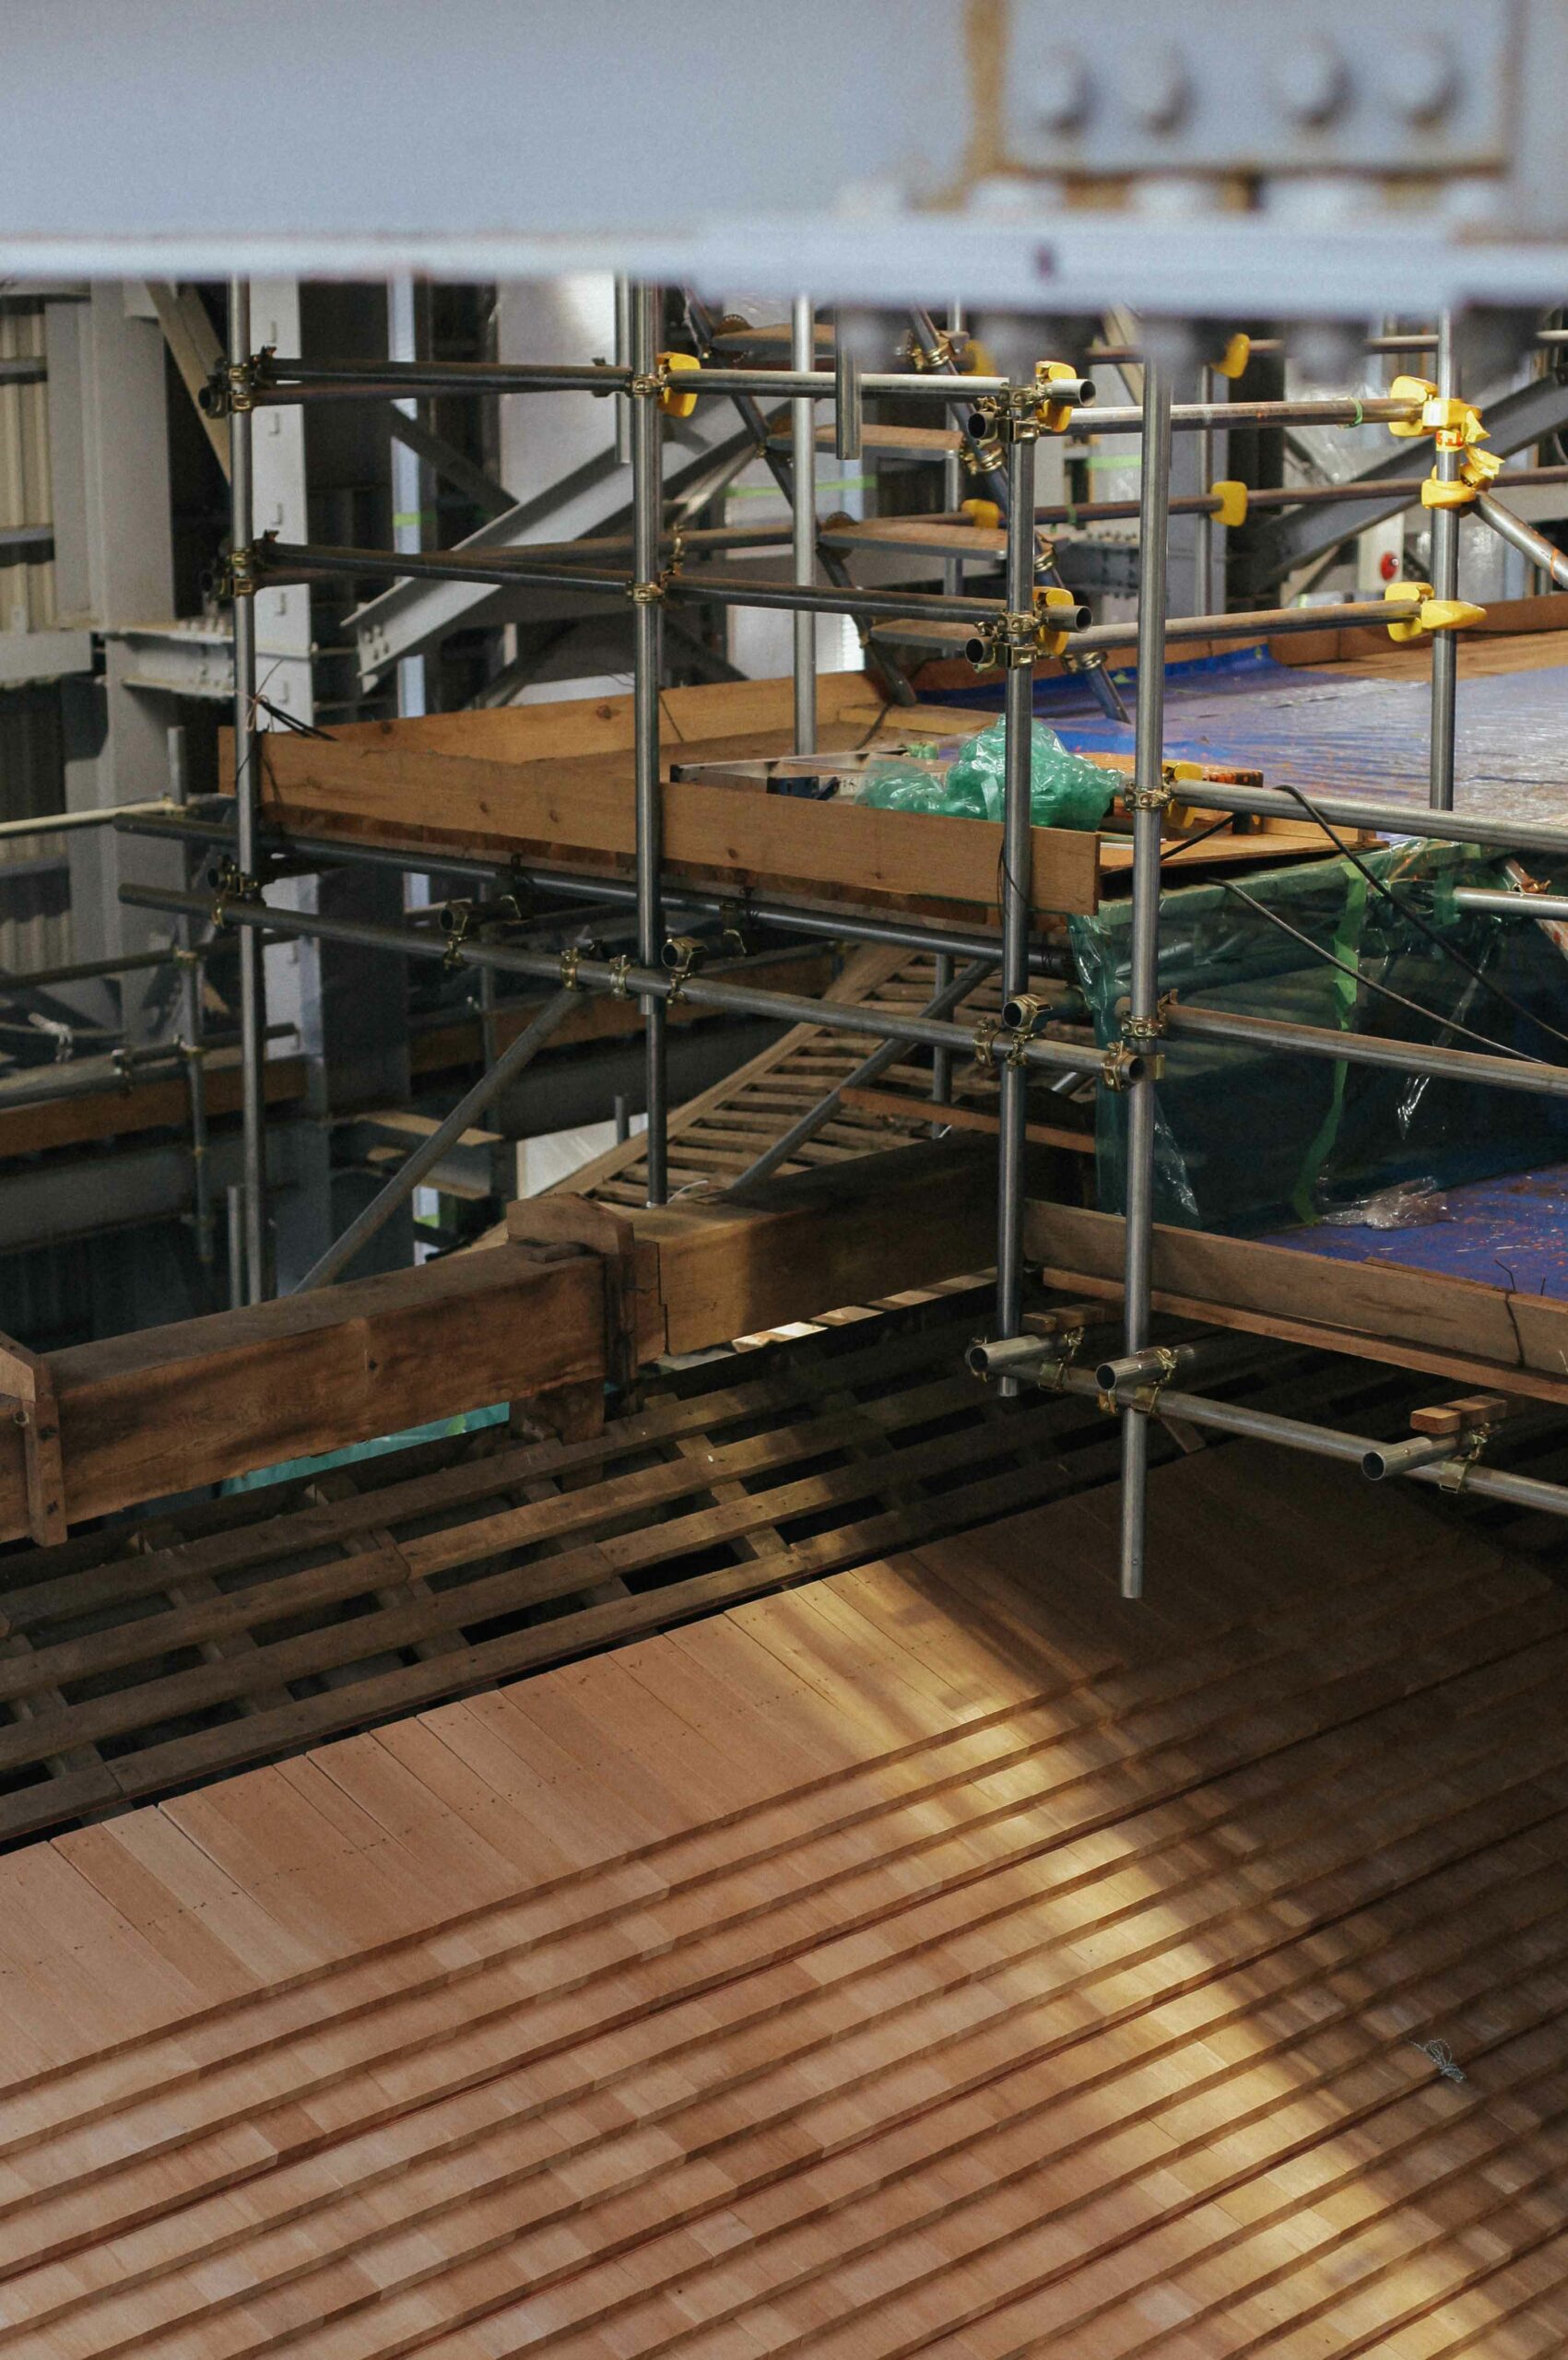 Scaffolding inside the covered building offers a unique opportunity to see newly laid cedar tiles.